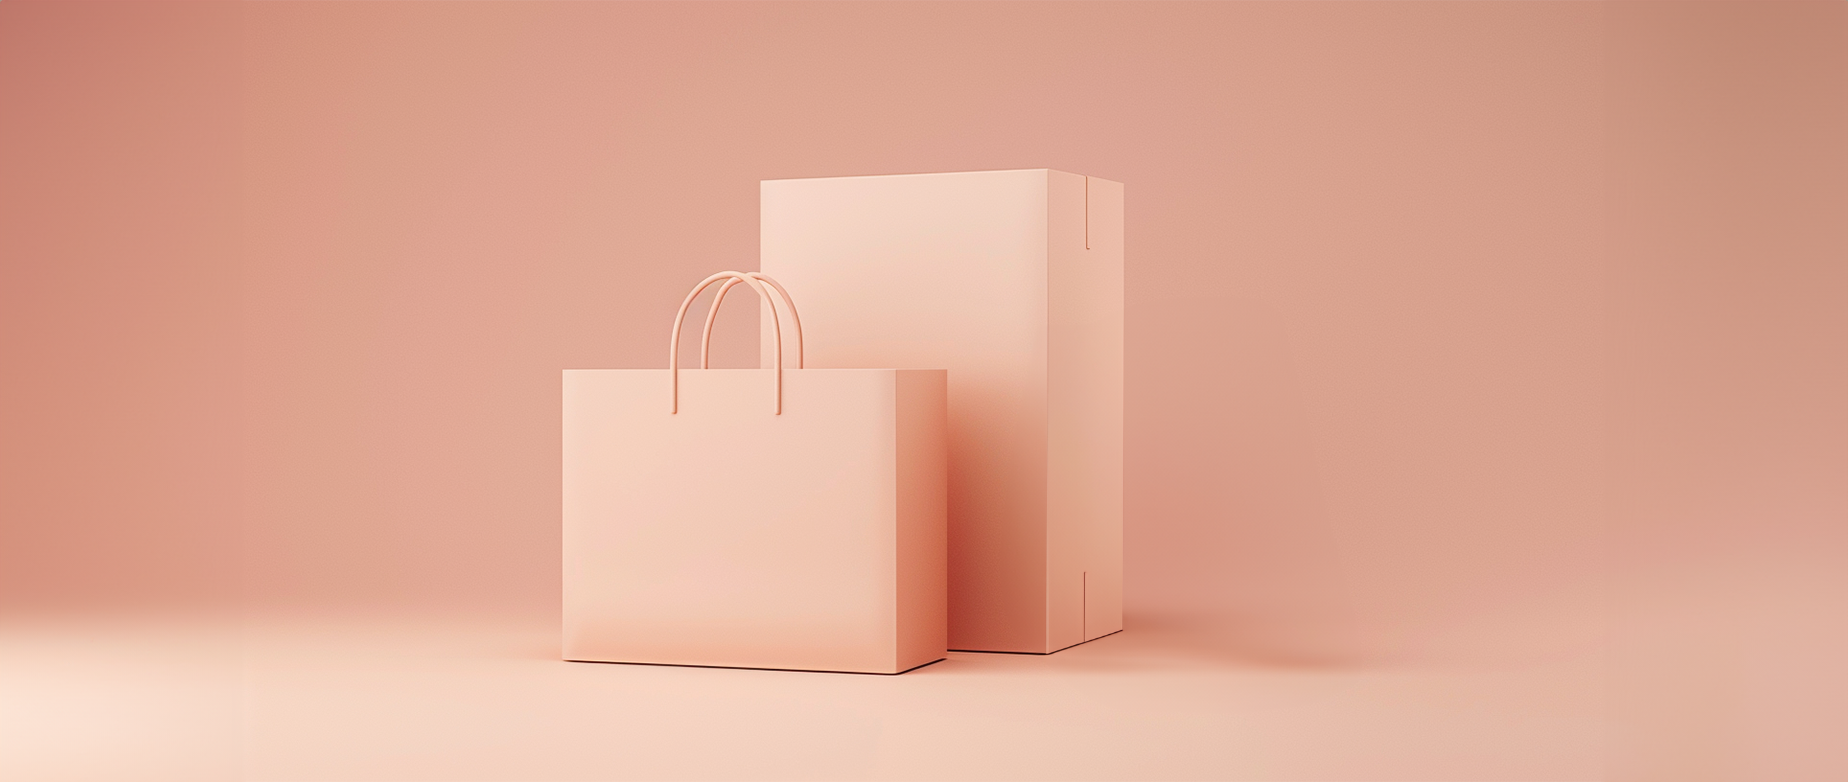 A shopping bag next to a box on a peach colored background.